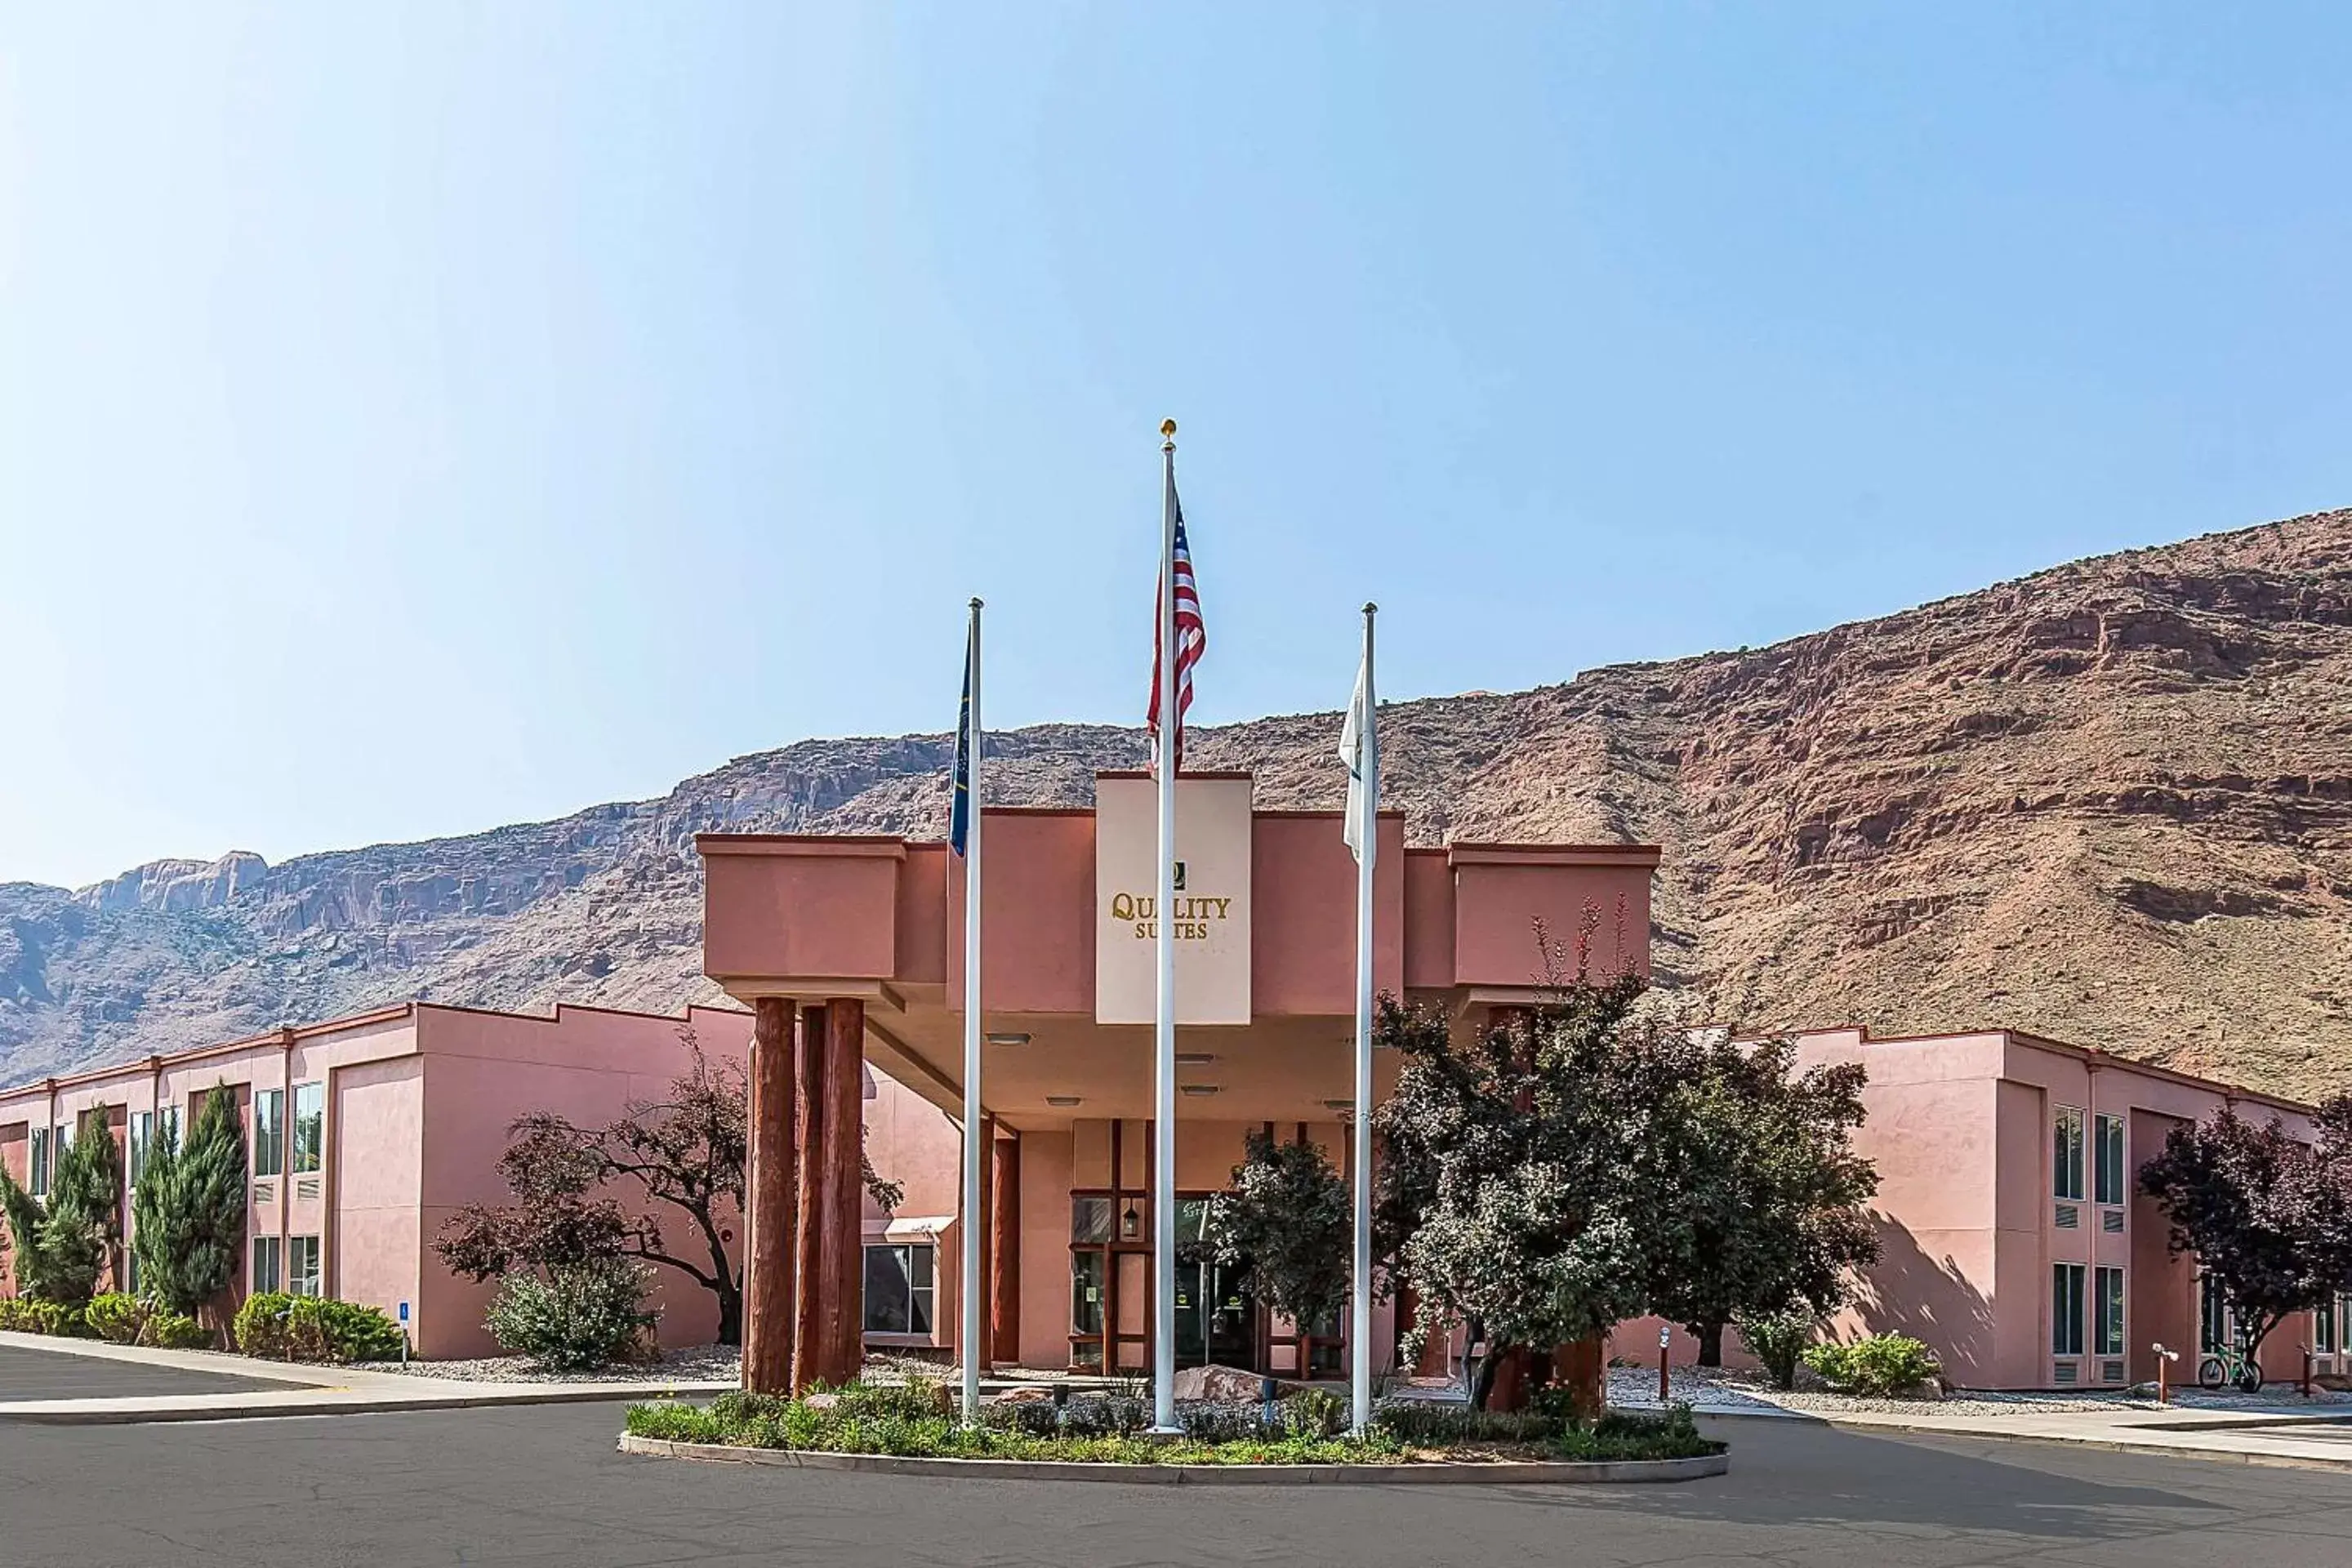 Property Building in Quality Suites Moab near Arches National Park